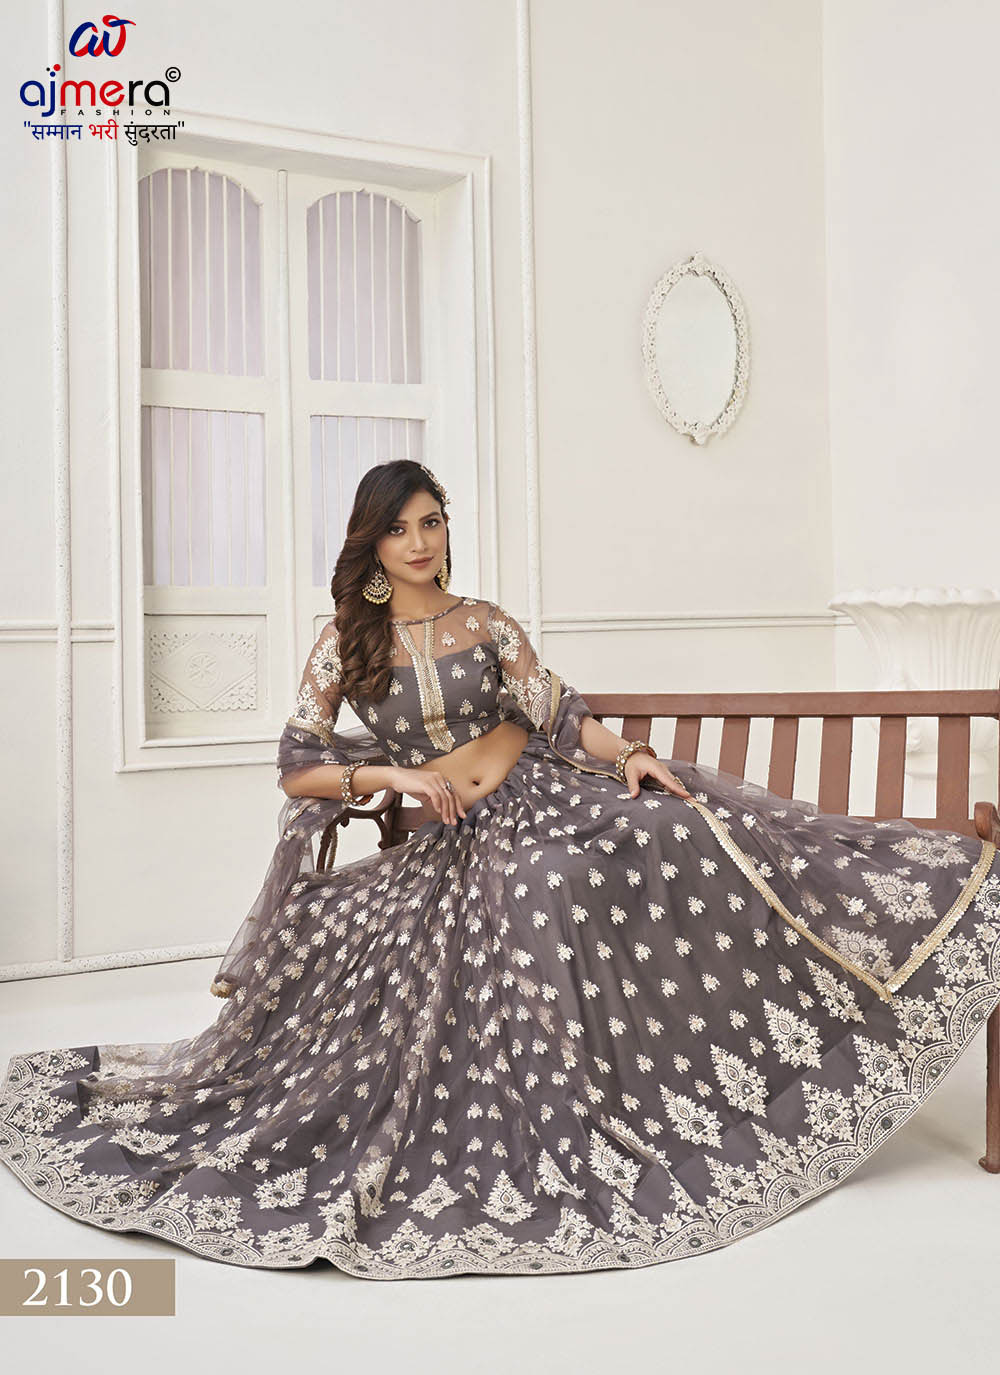 Net Pair Lehnga (2) Manufacturers, Suppliers in Sweden